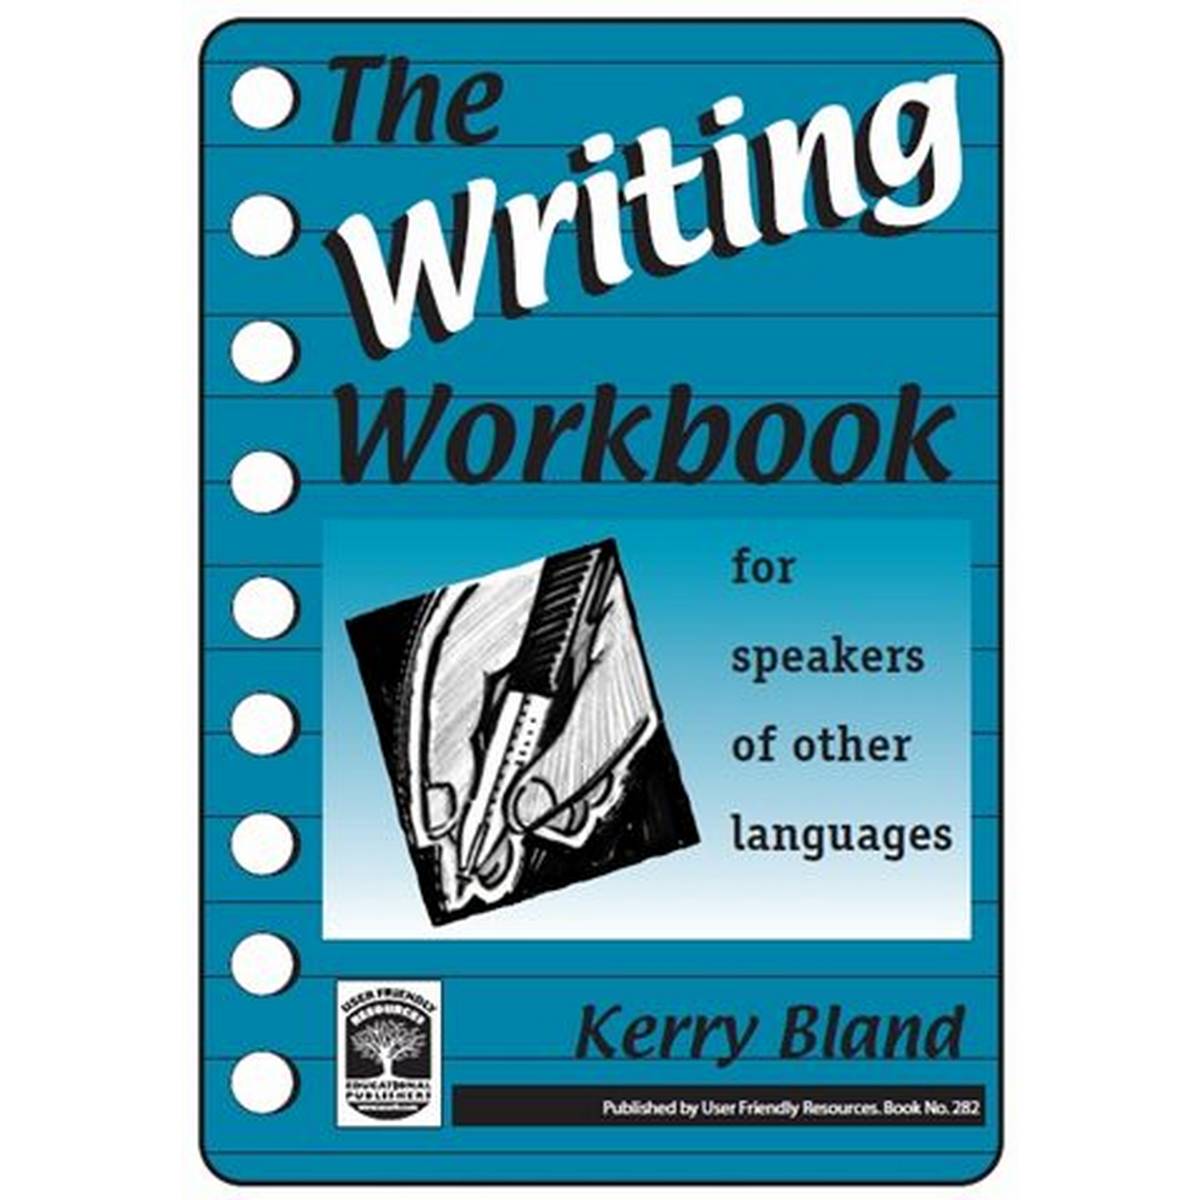 Writing Workbook for Speakers of Other Languages